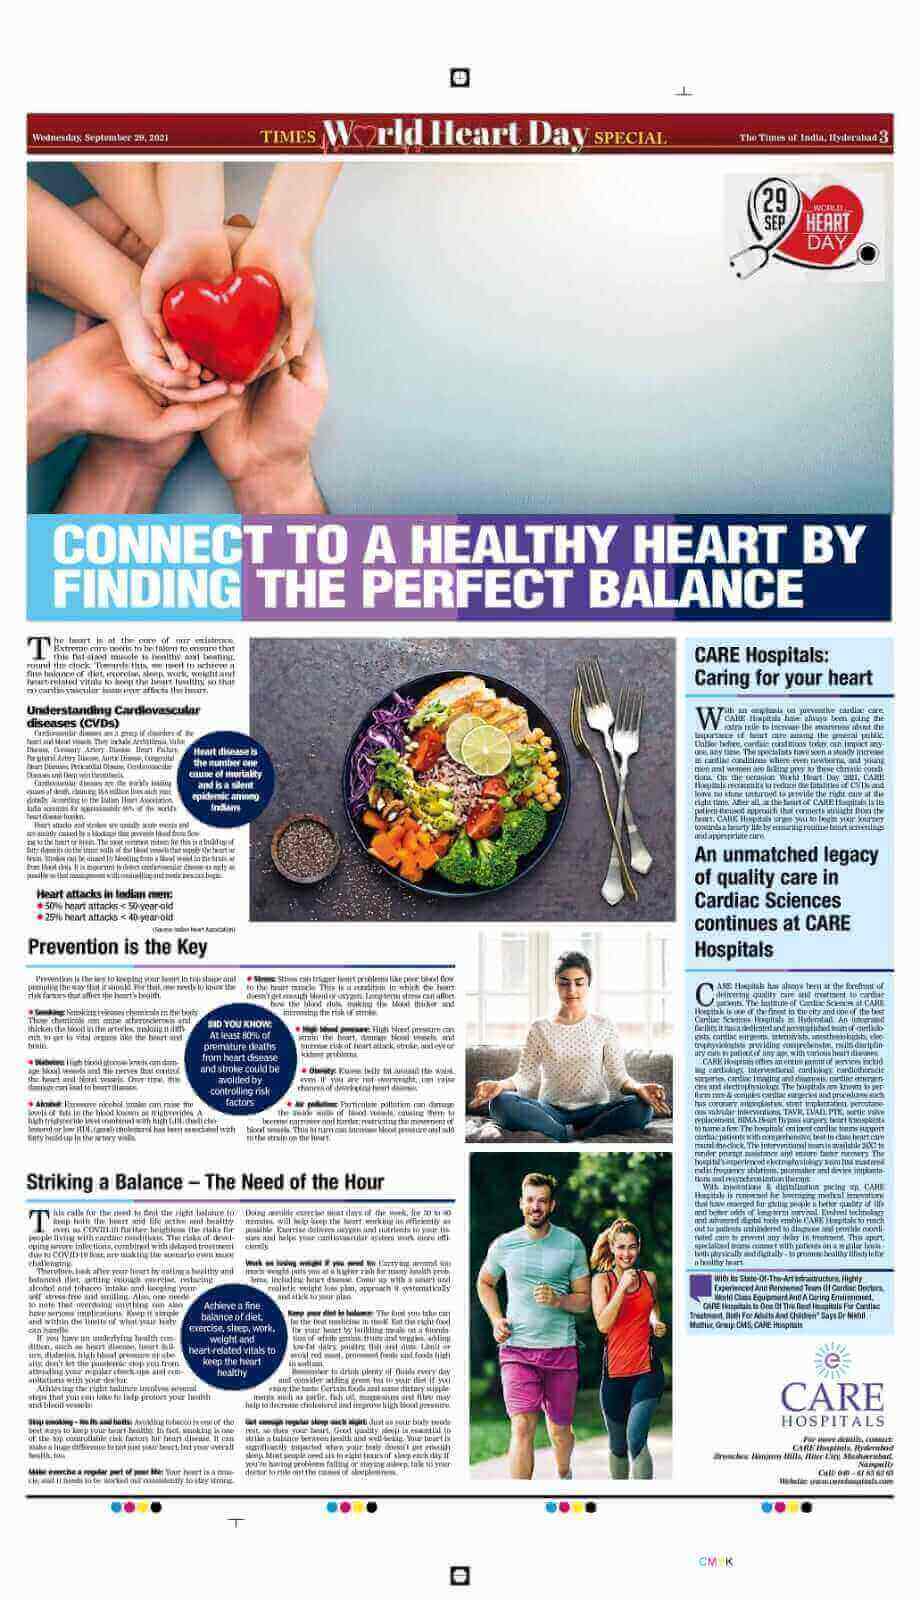 Connect to Healthy Heart. Article on the occasion of World Heart Day 2021 by Times of India